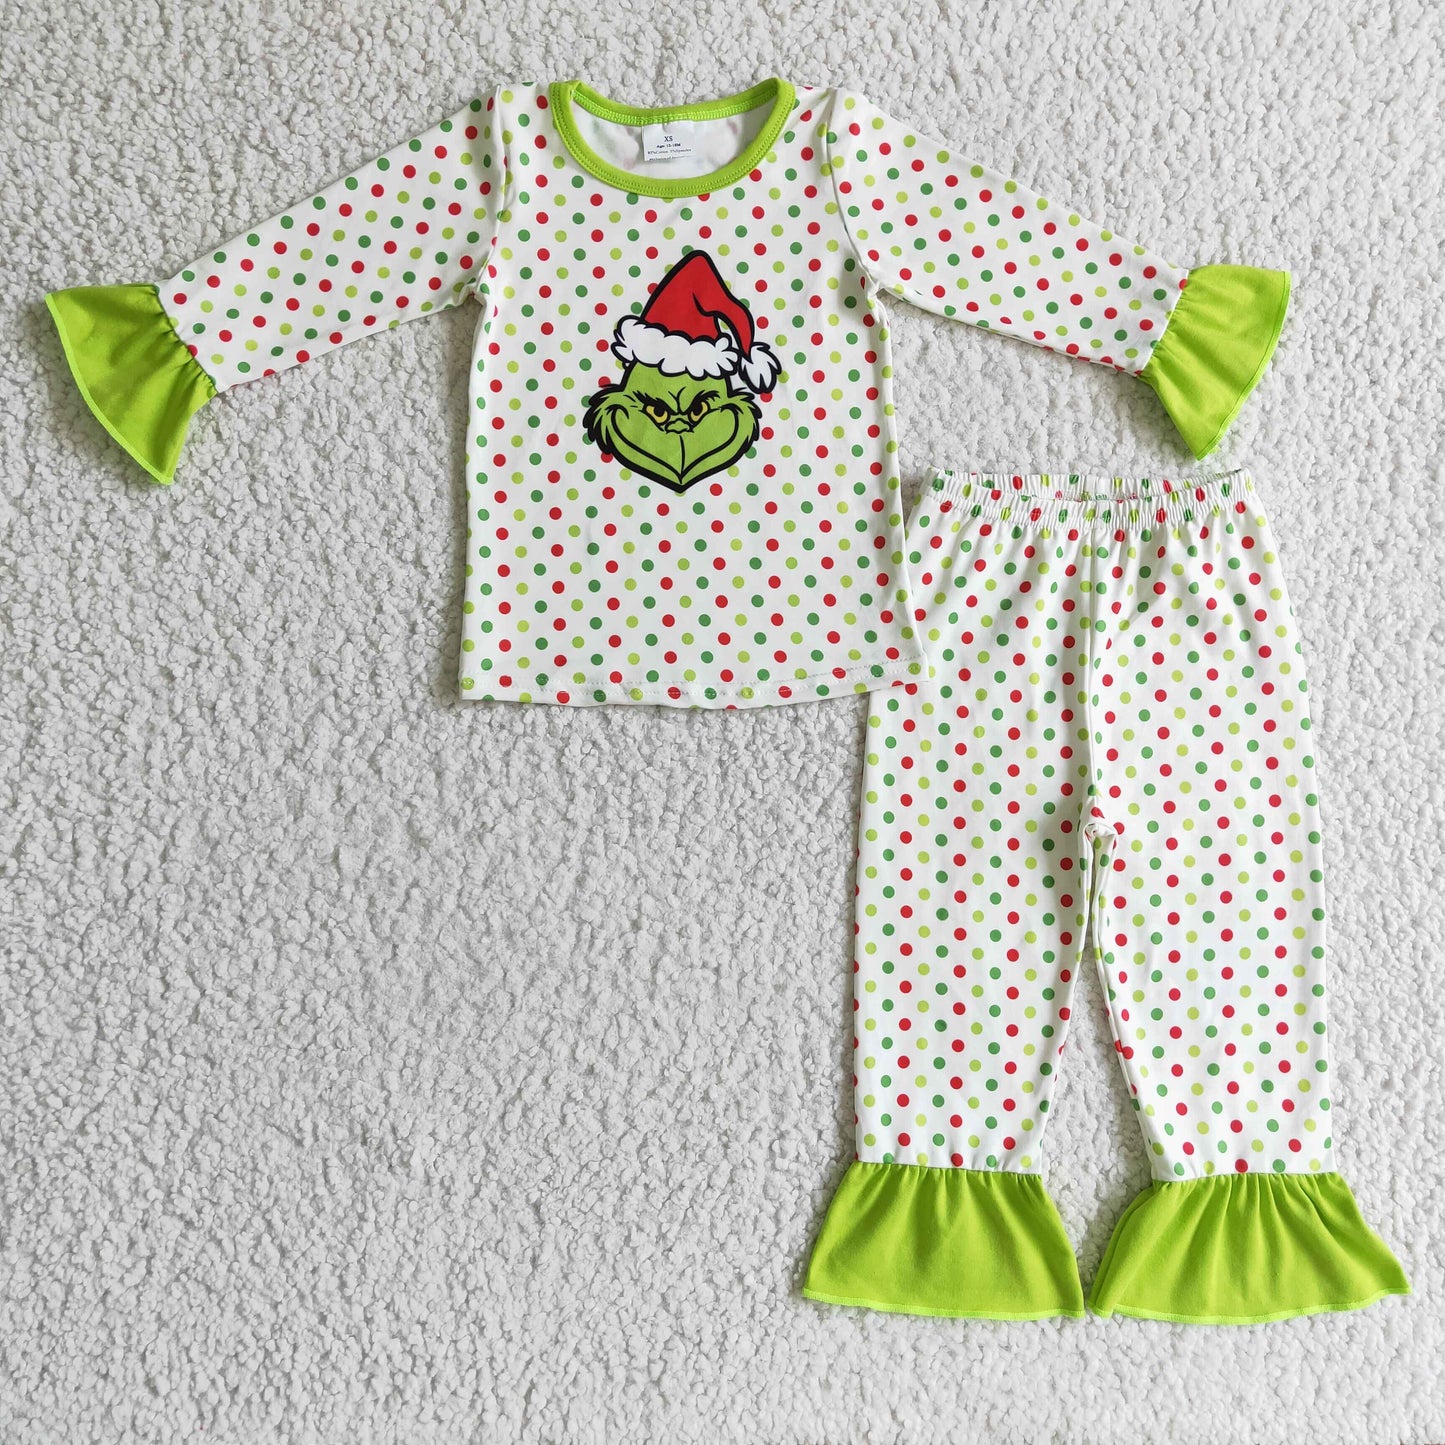 6 B10-25 baby girls christmas colorful polka dot long sleeve outfit with green ruffle